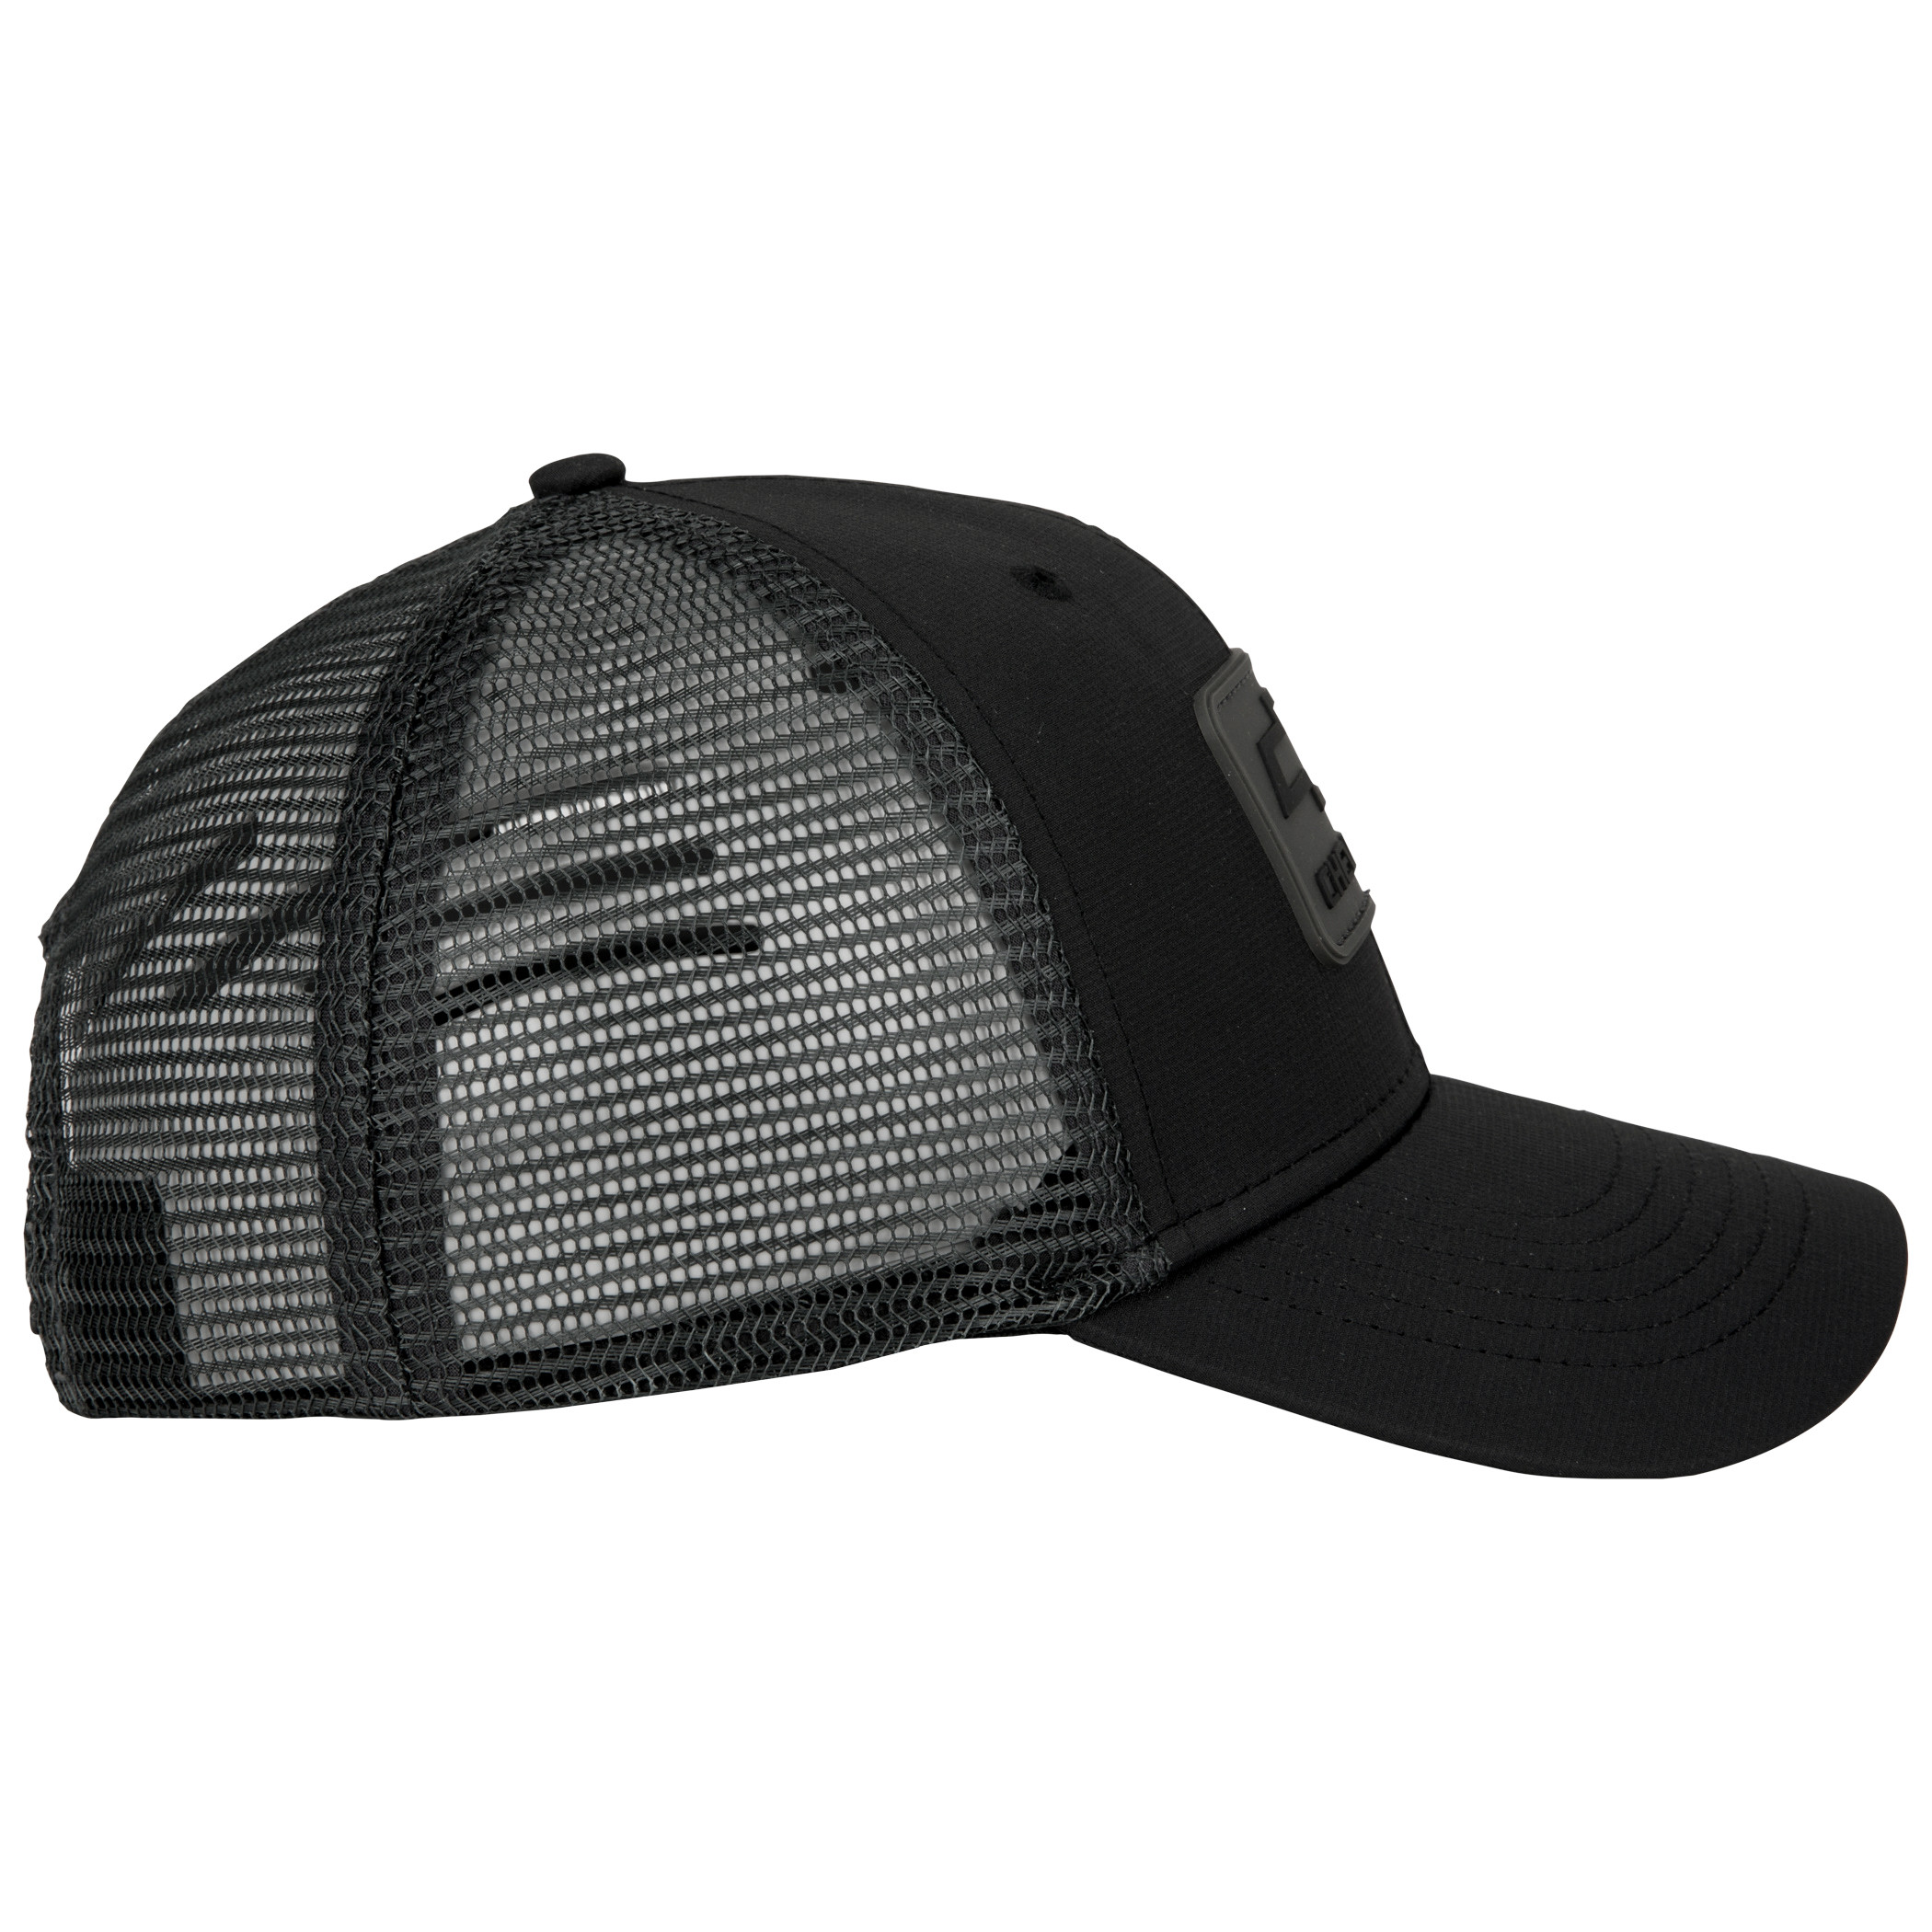 Chevy Logo Black and Grey Colorway Mesh Back Hat